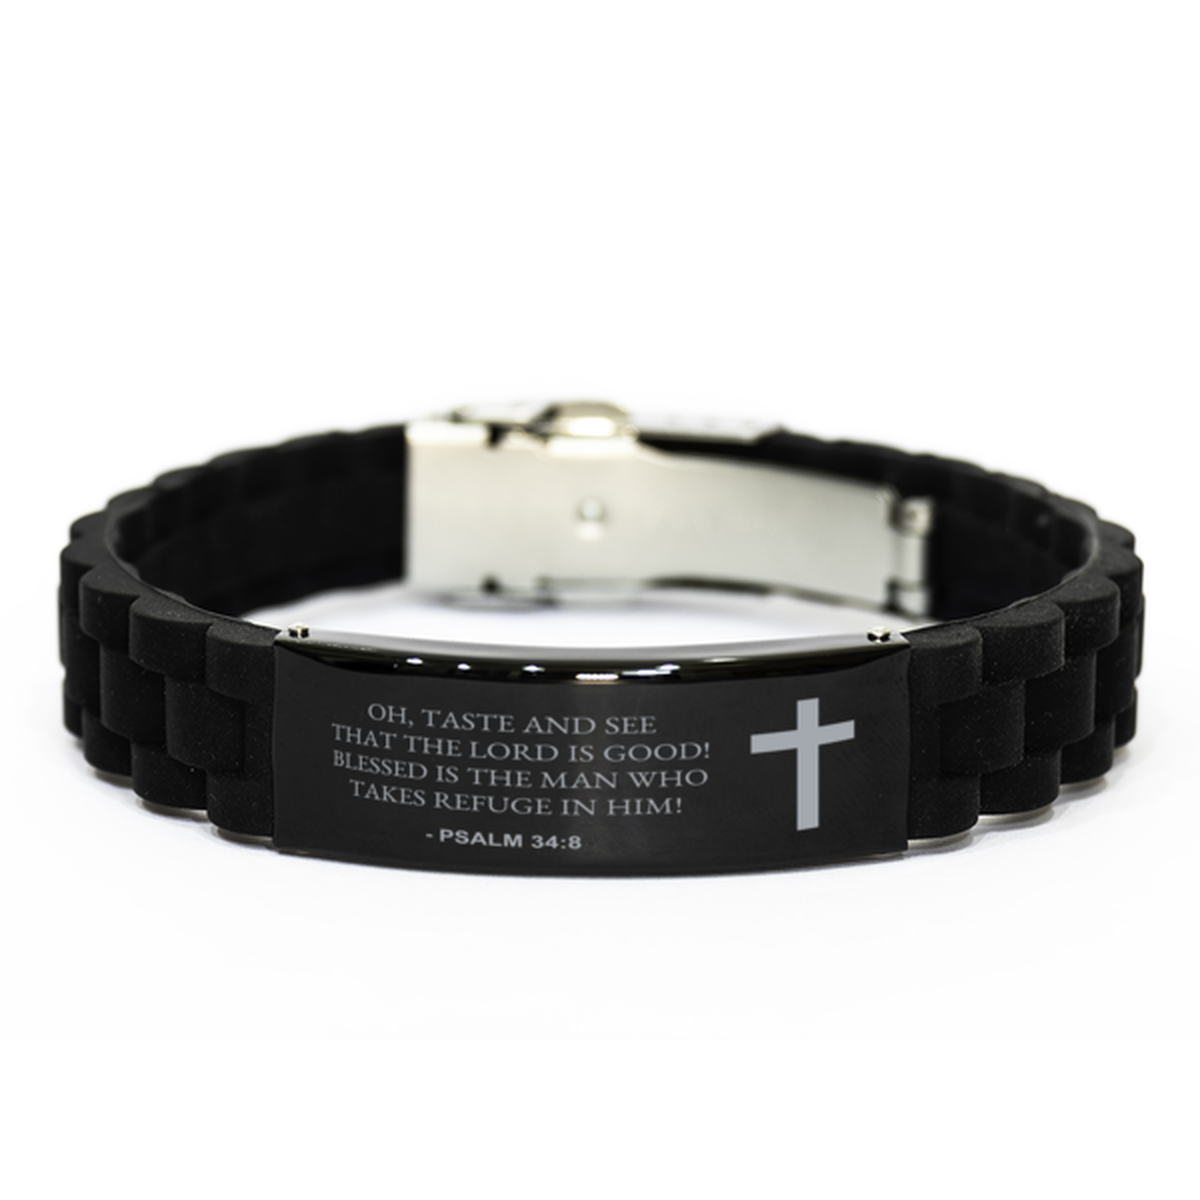 Bible Verse Black Bracelet,, Psalm 34:8 Oh, Taste And See That The Lord Is Good! Blessed, Inspirational Christian Gifts For Men Women